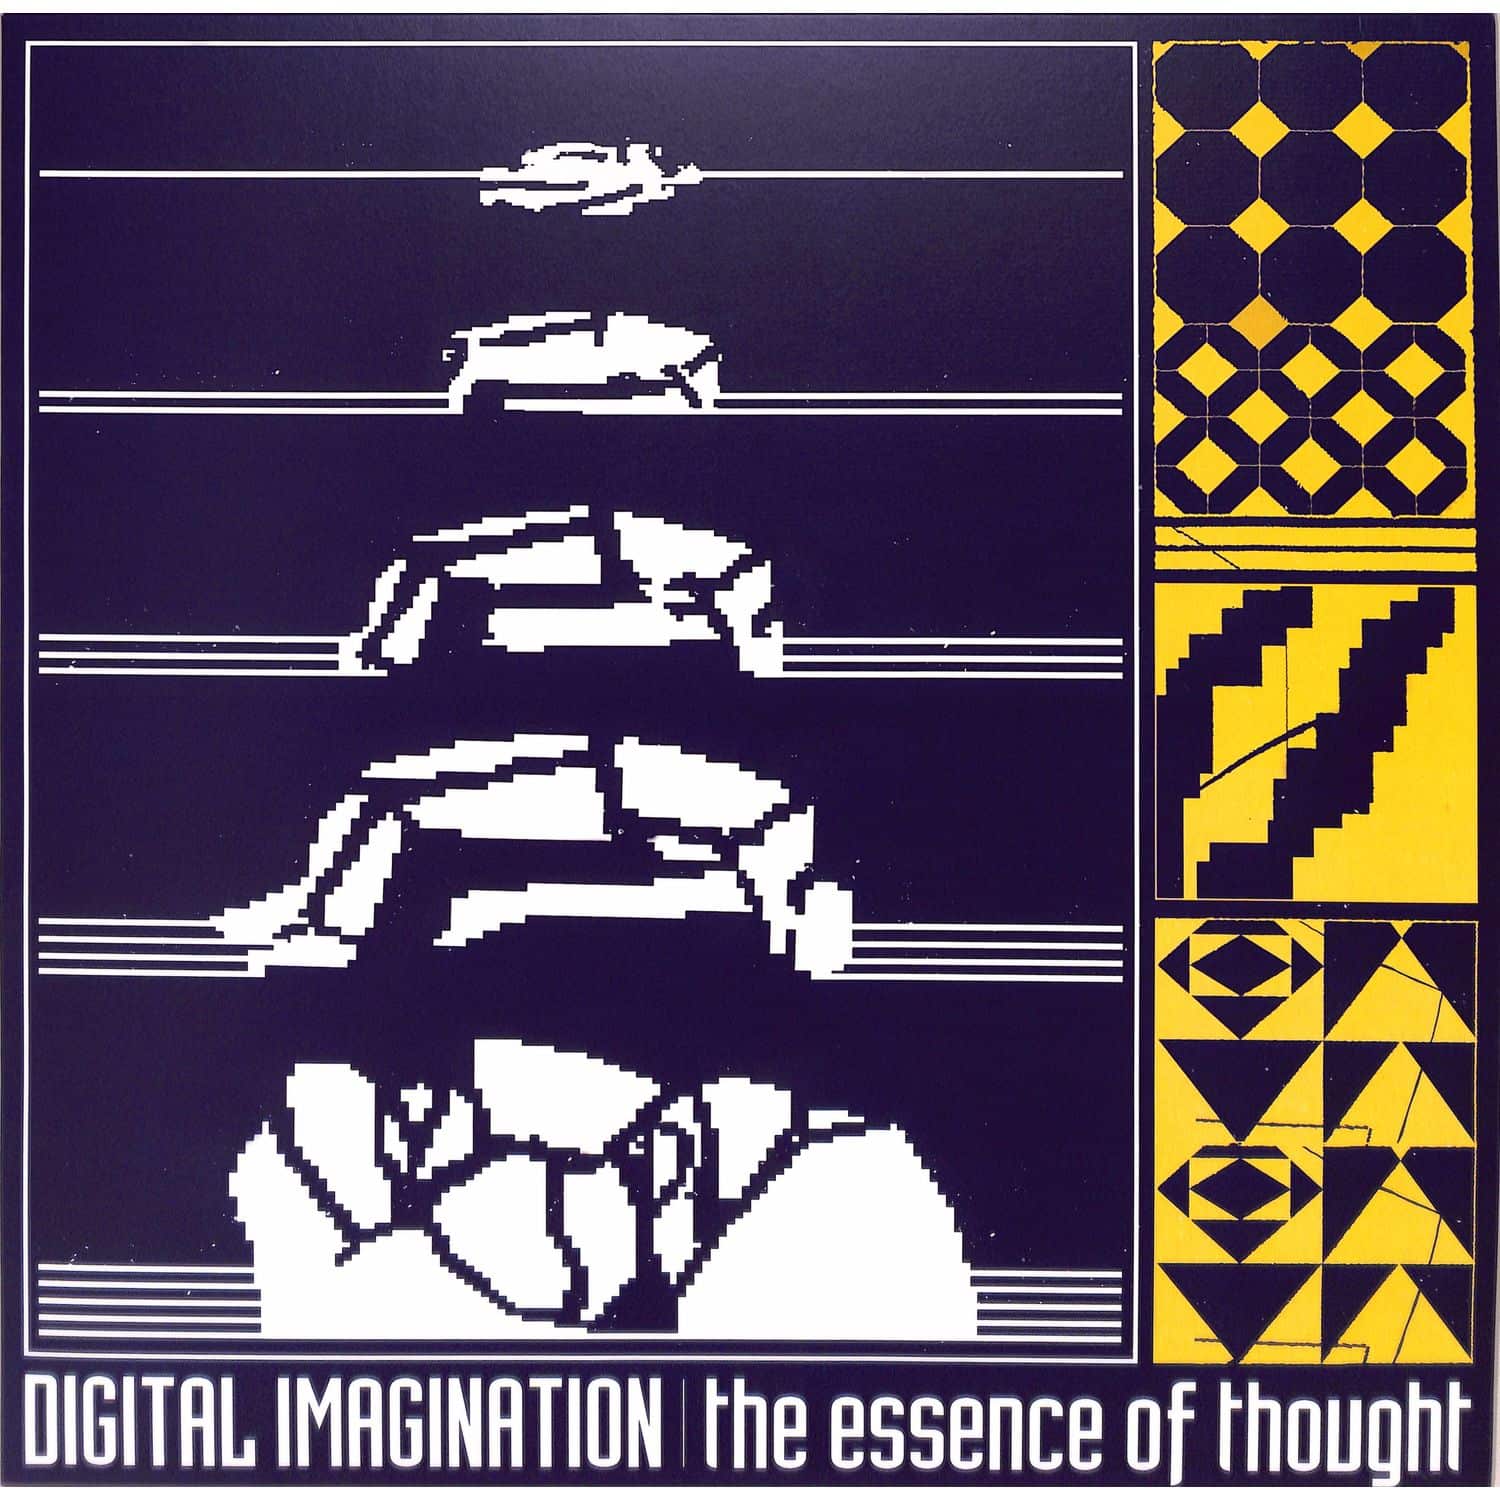 Digital Imagination - THE ESSENCE OF THOUGHT